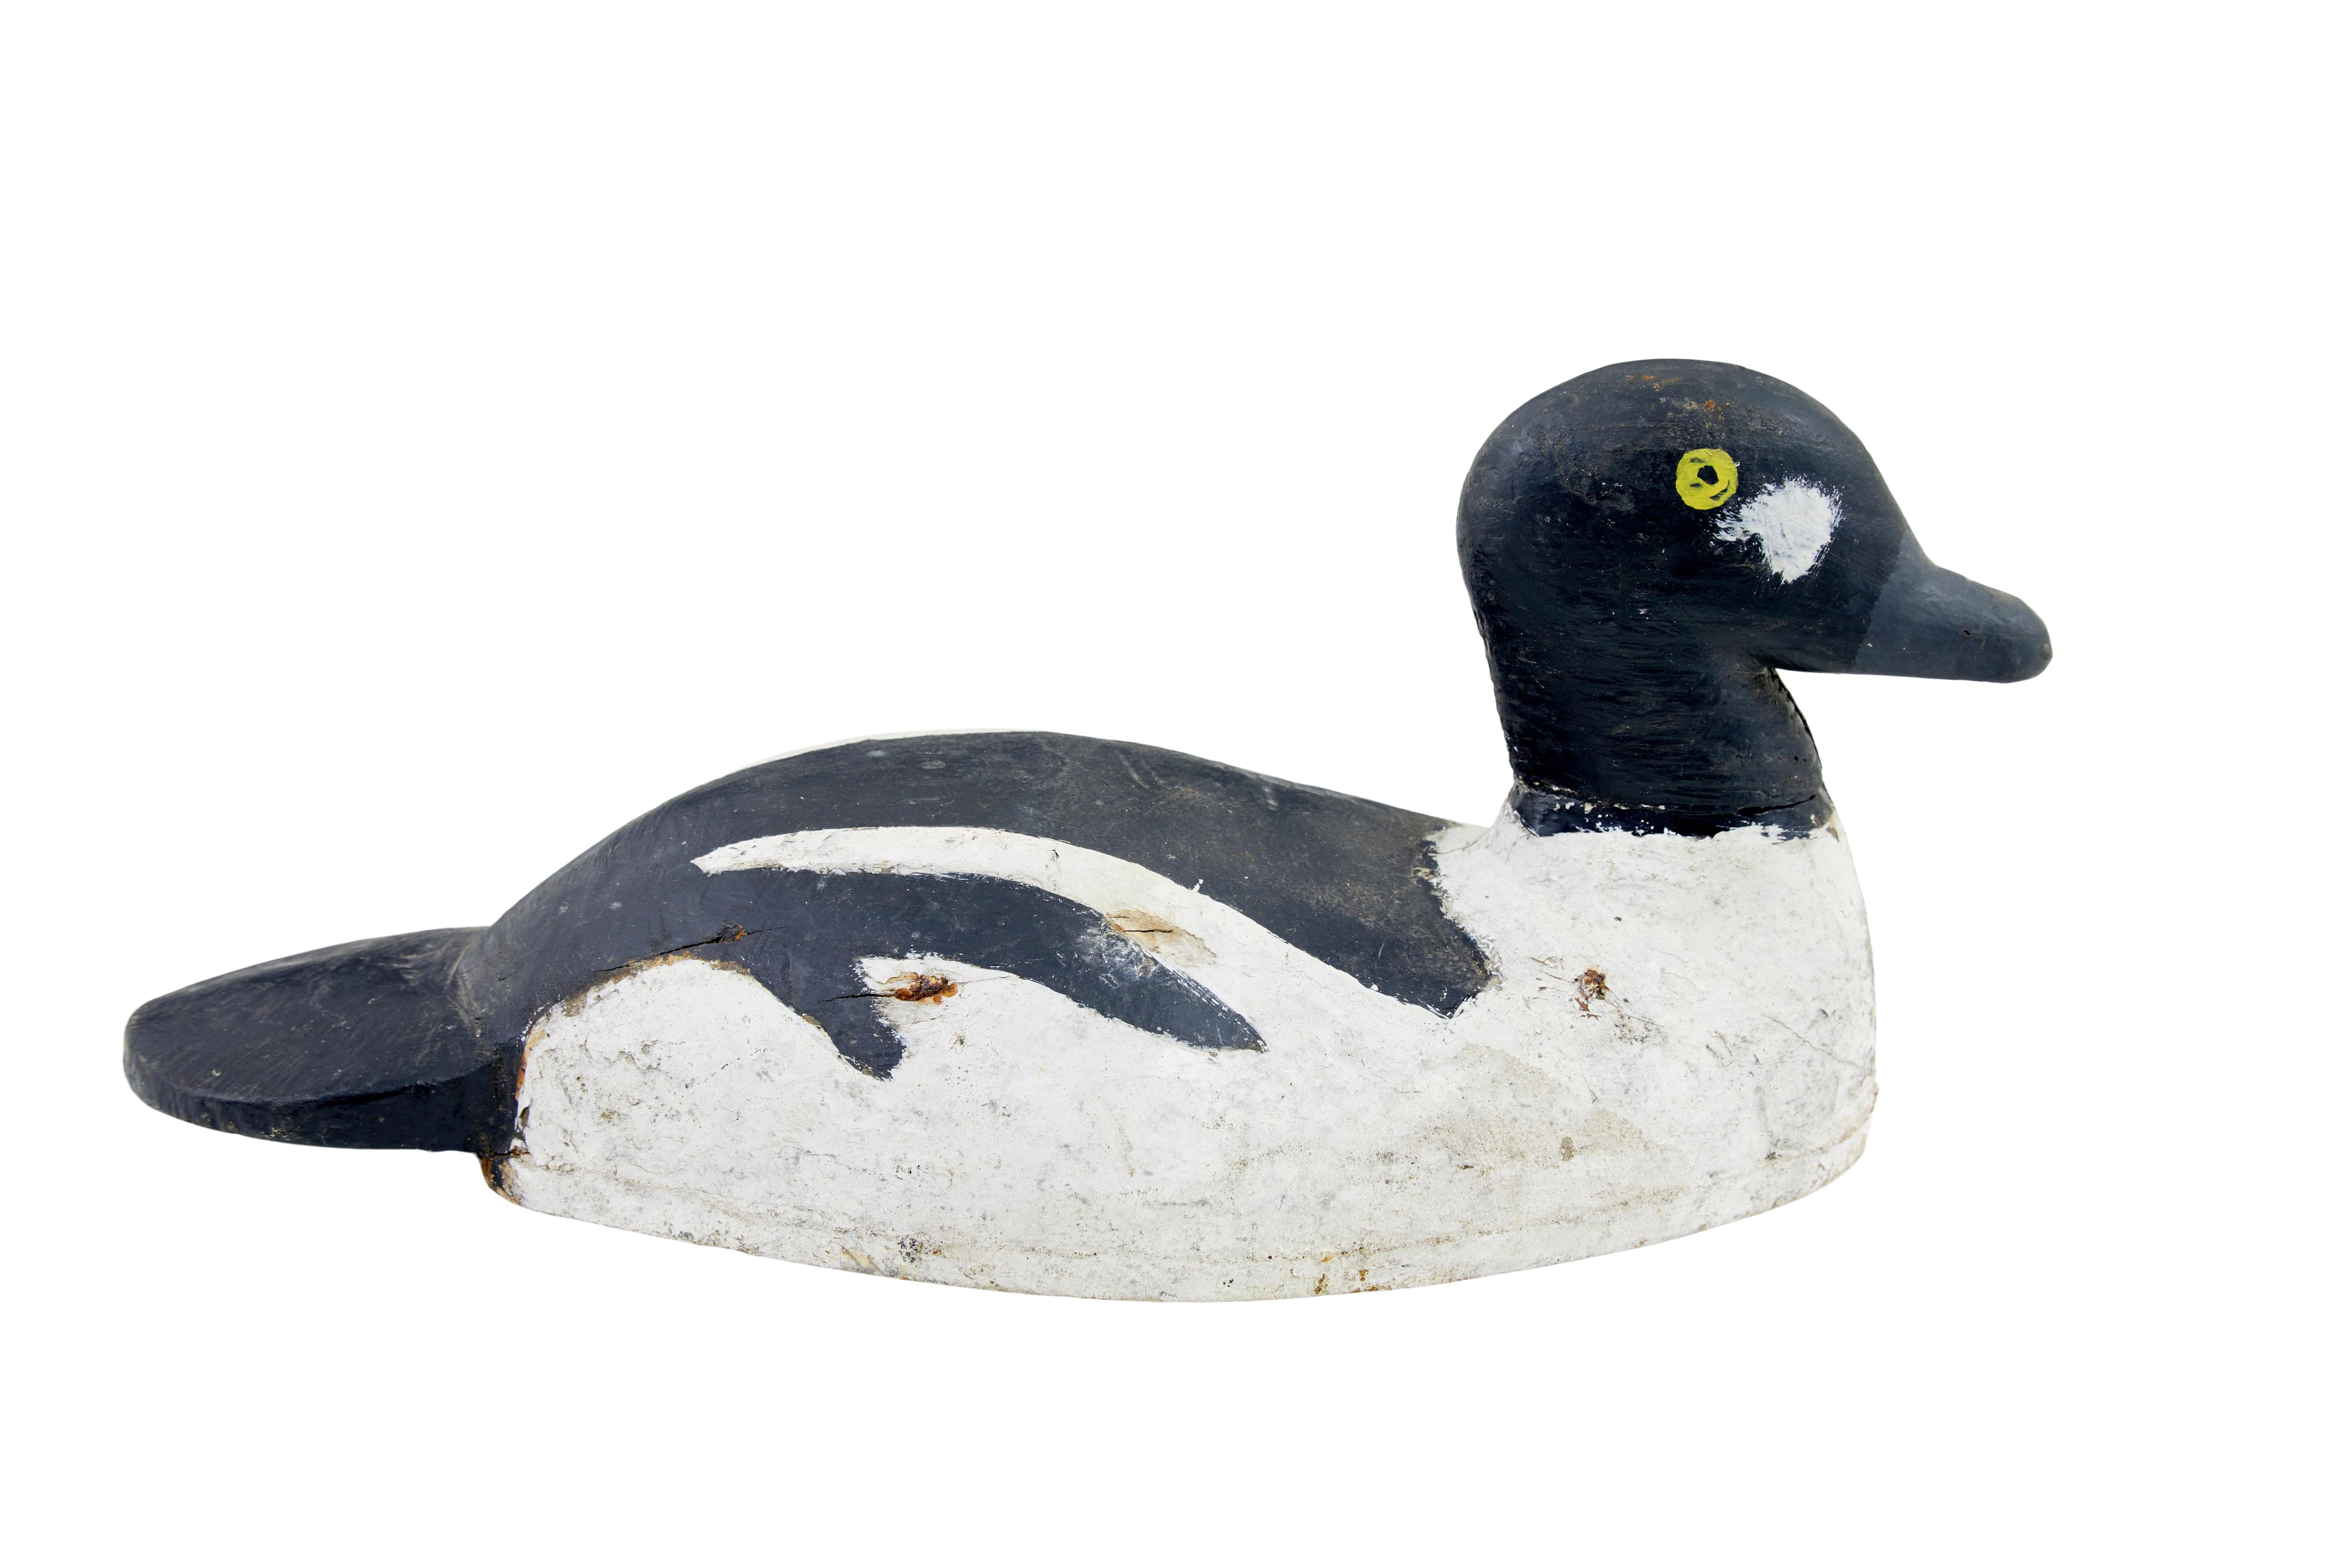 Early 20th century carved hand painted decoy circa 1920.

Hand painted Scandinavian decoy duck, black and white paint scheme with yellow eyes.   Fine example of how things used to be done, now making a great display item.

Expected paint losses and